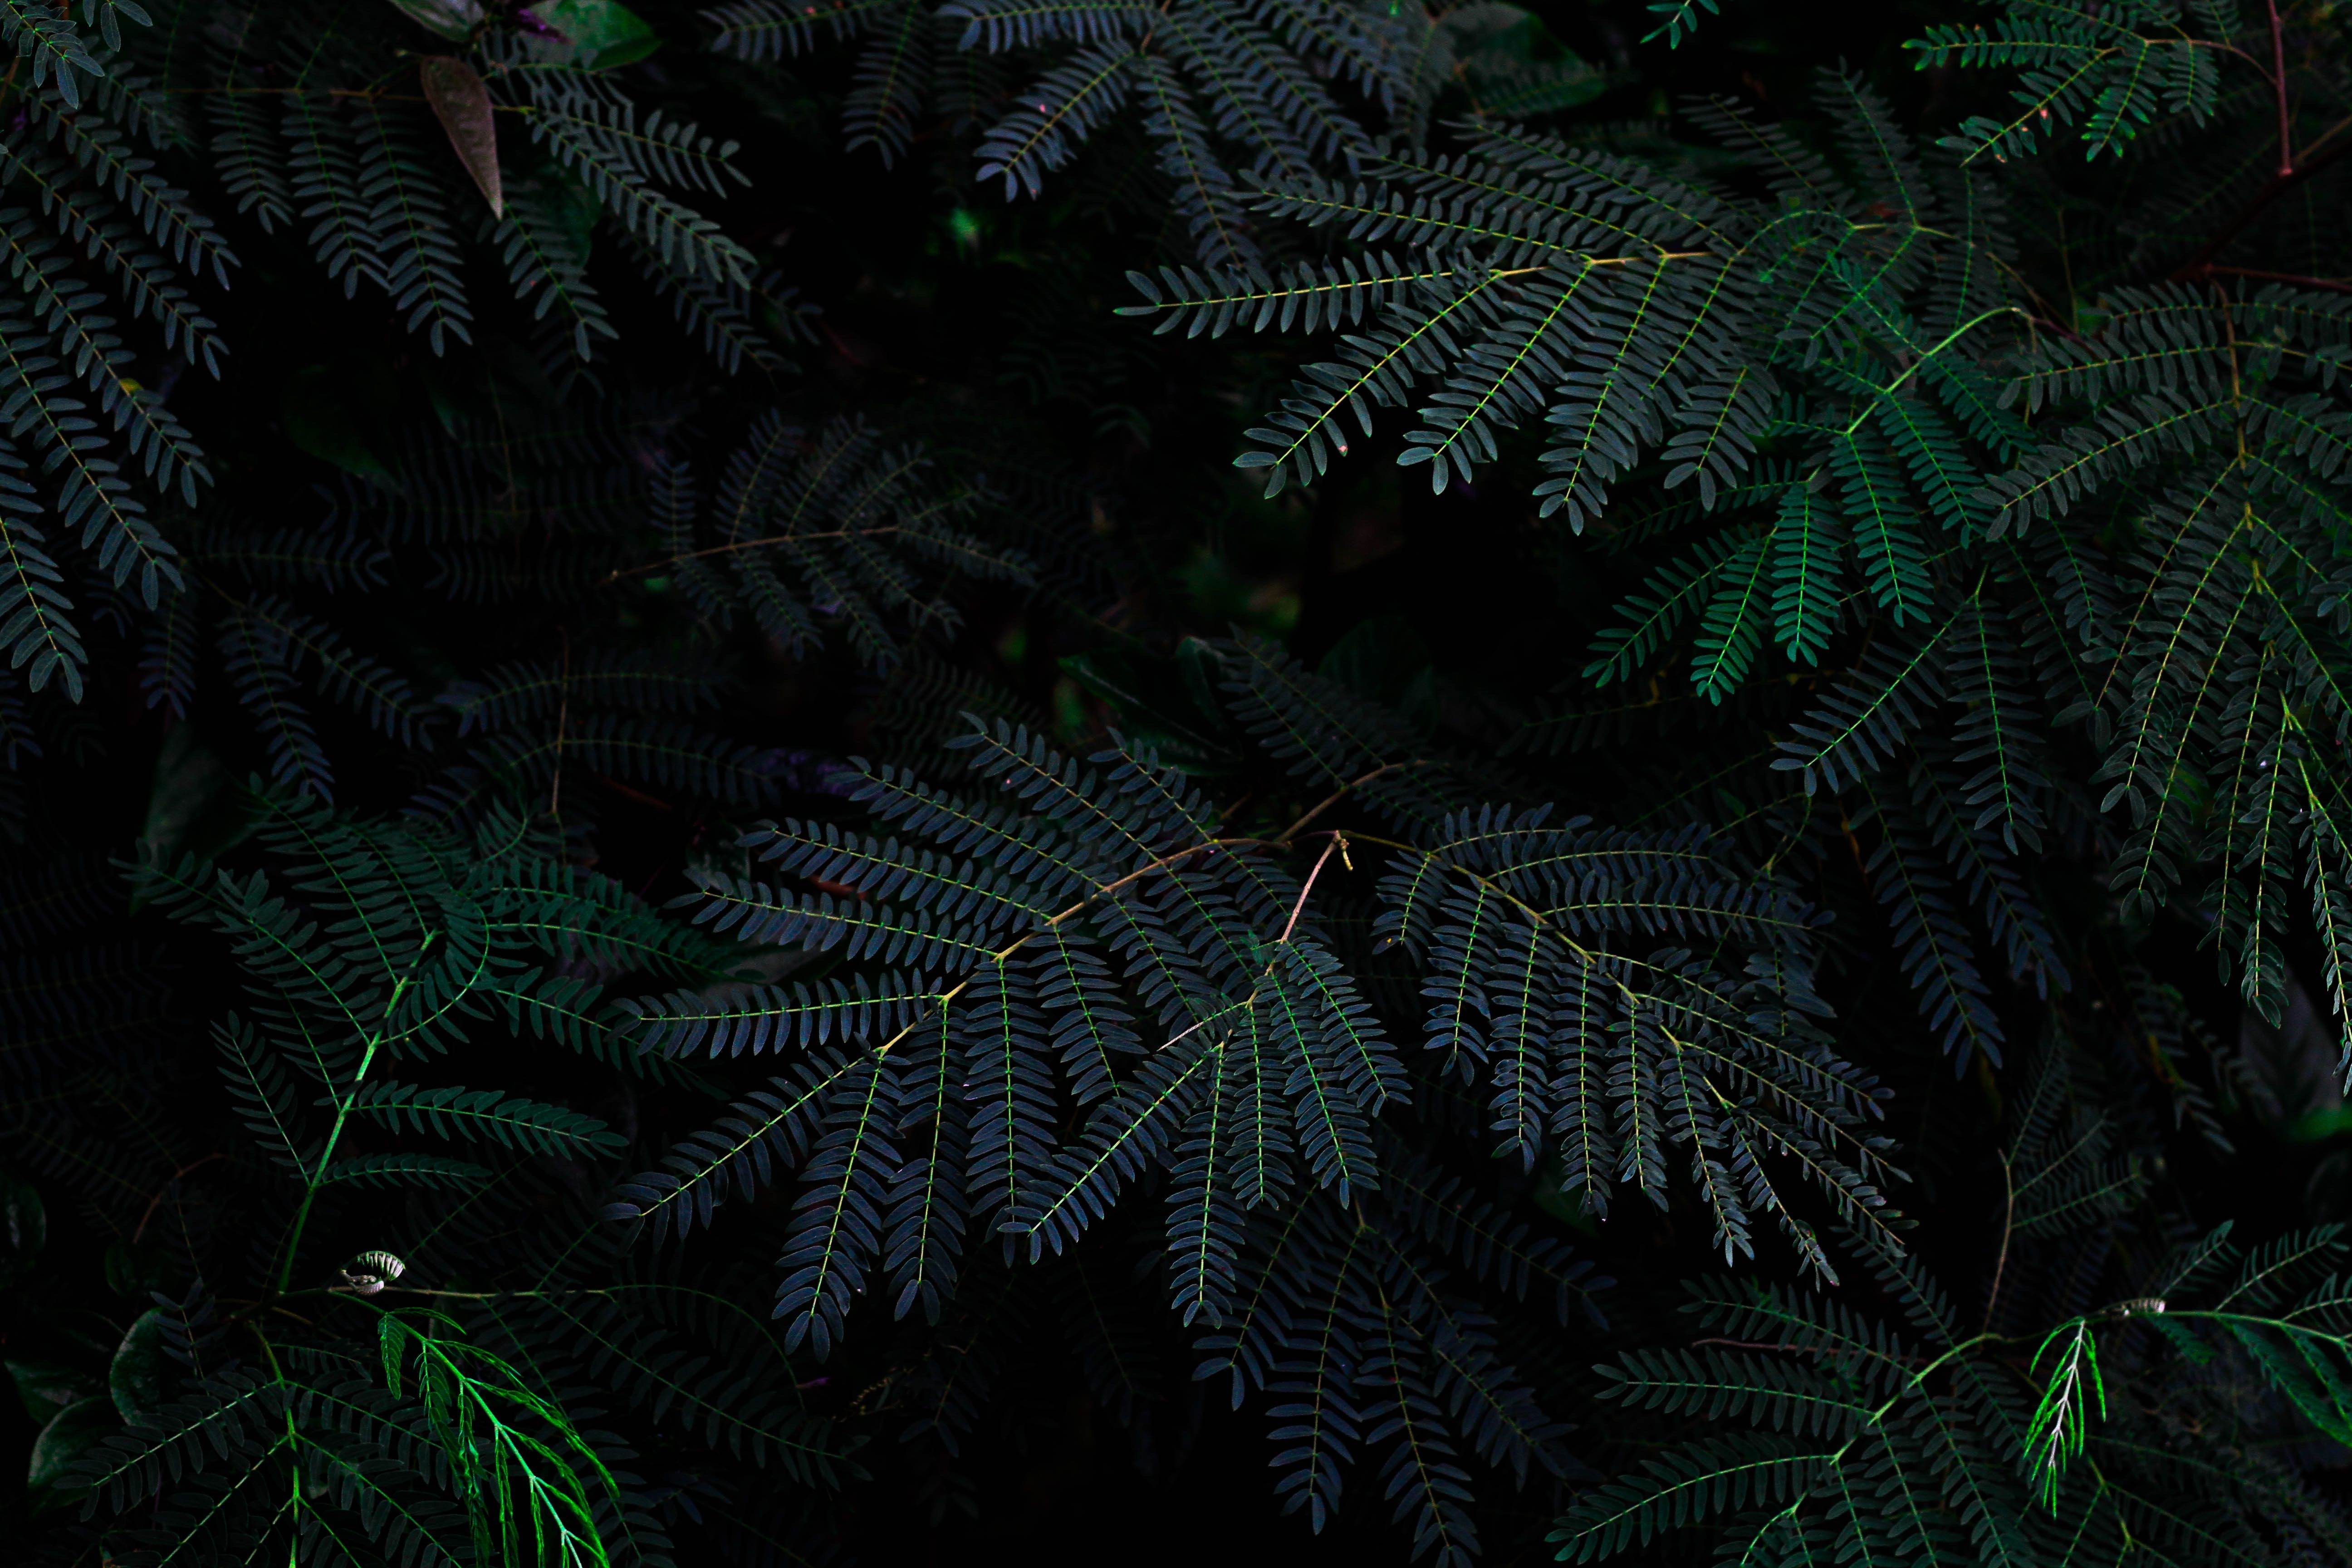 HD Wallpaper Up close photo of dark green pine tree limbs in a forest - #Tree #Writer Requiem for the Ame. Background HD wallpaper, Fern plant, Nature picture